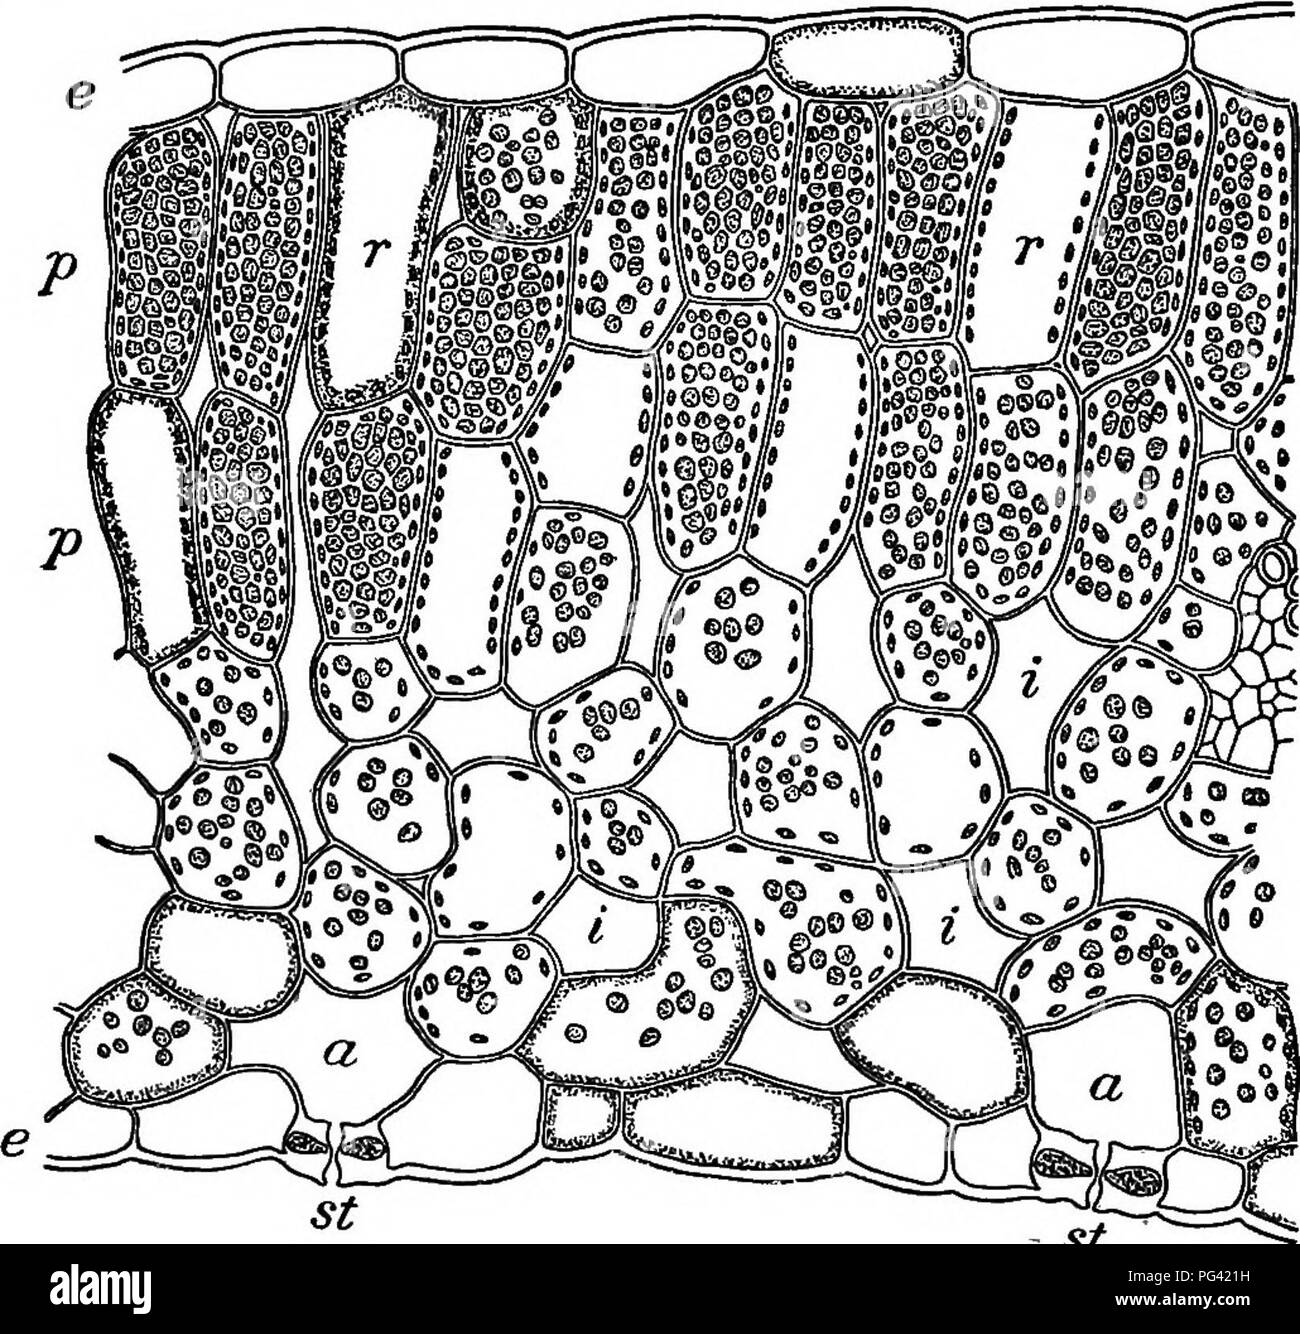 . Essentials of botany. Botany; Botany. 128 ESSENTIALS OF BOTANY 151. Stomata. — A stoma is a microscopic pore or slit in the epidermis. It is bounded and opened and shut by guard-cells (Fig. 94, g), usually two in number. These. Fig Vertical Section of the Leaf of the Beet. - St (Much magnified.) e, epidermis; p, palisade-cells (and similar elongated cells); r, cells filled with red cell-sap; i, intercellular spaces; o, air spaces communicating with the stomata; st, stomata, or breathing pores. are generally somewhat kidney-shaped and become more or less curved as they are fuller or less full Stock Photo